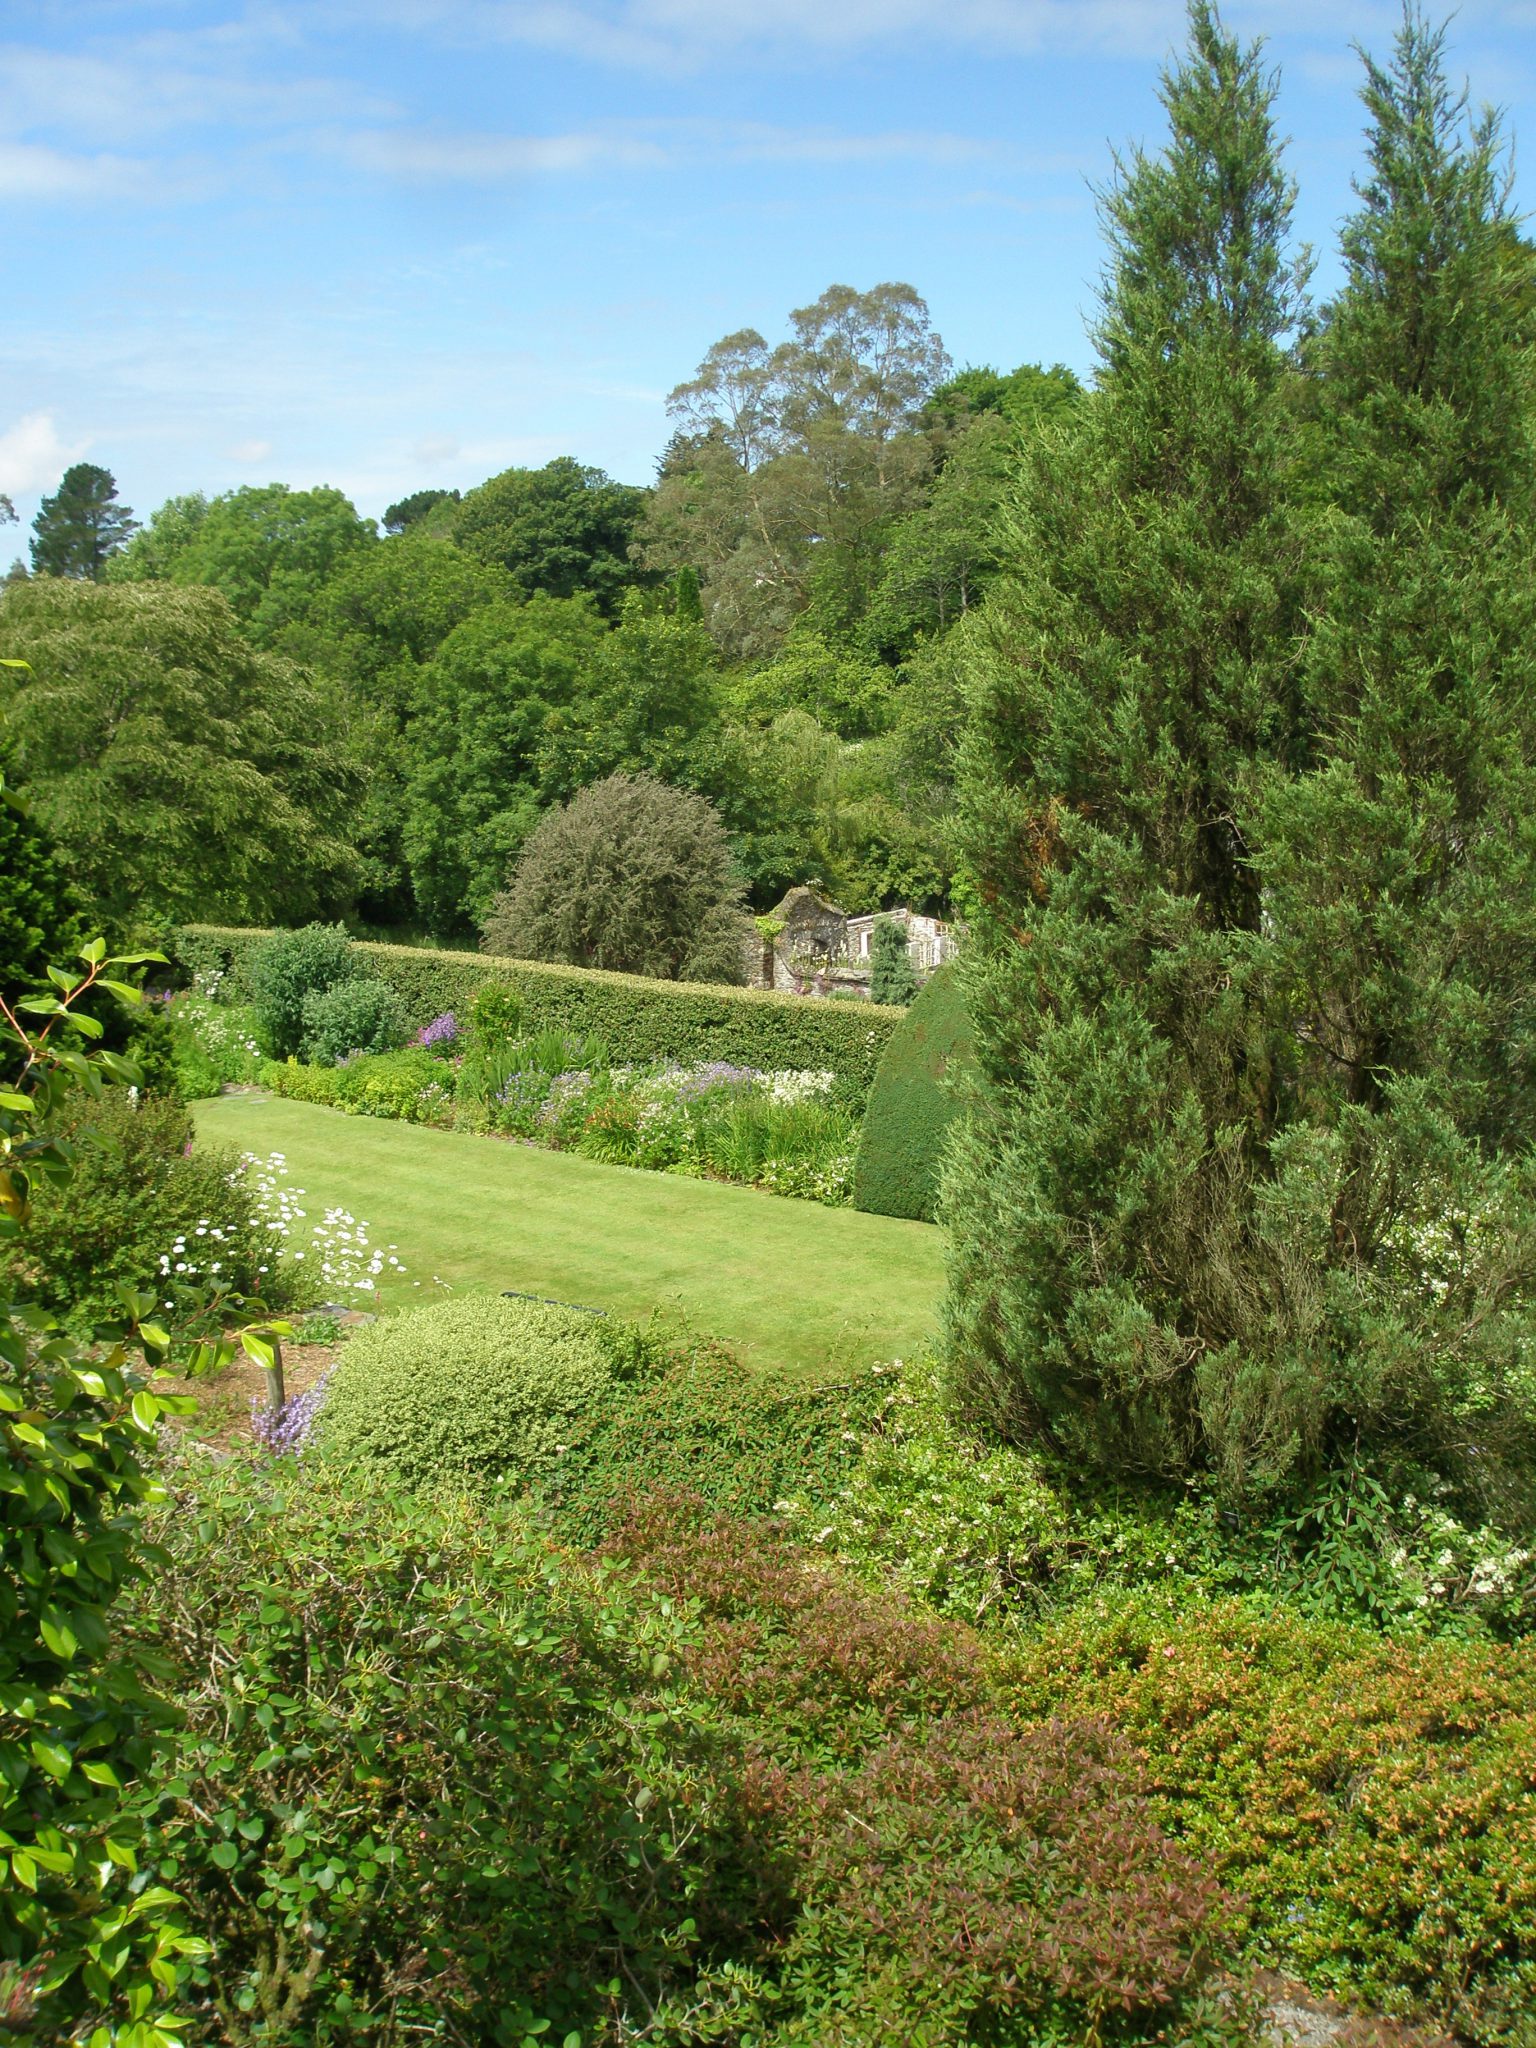 From behind the House, we peered down to the Tennis Court Lawn, which is on an upper terrace of the Walled Garden.